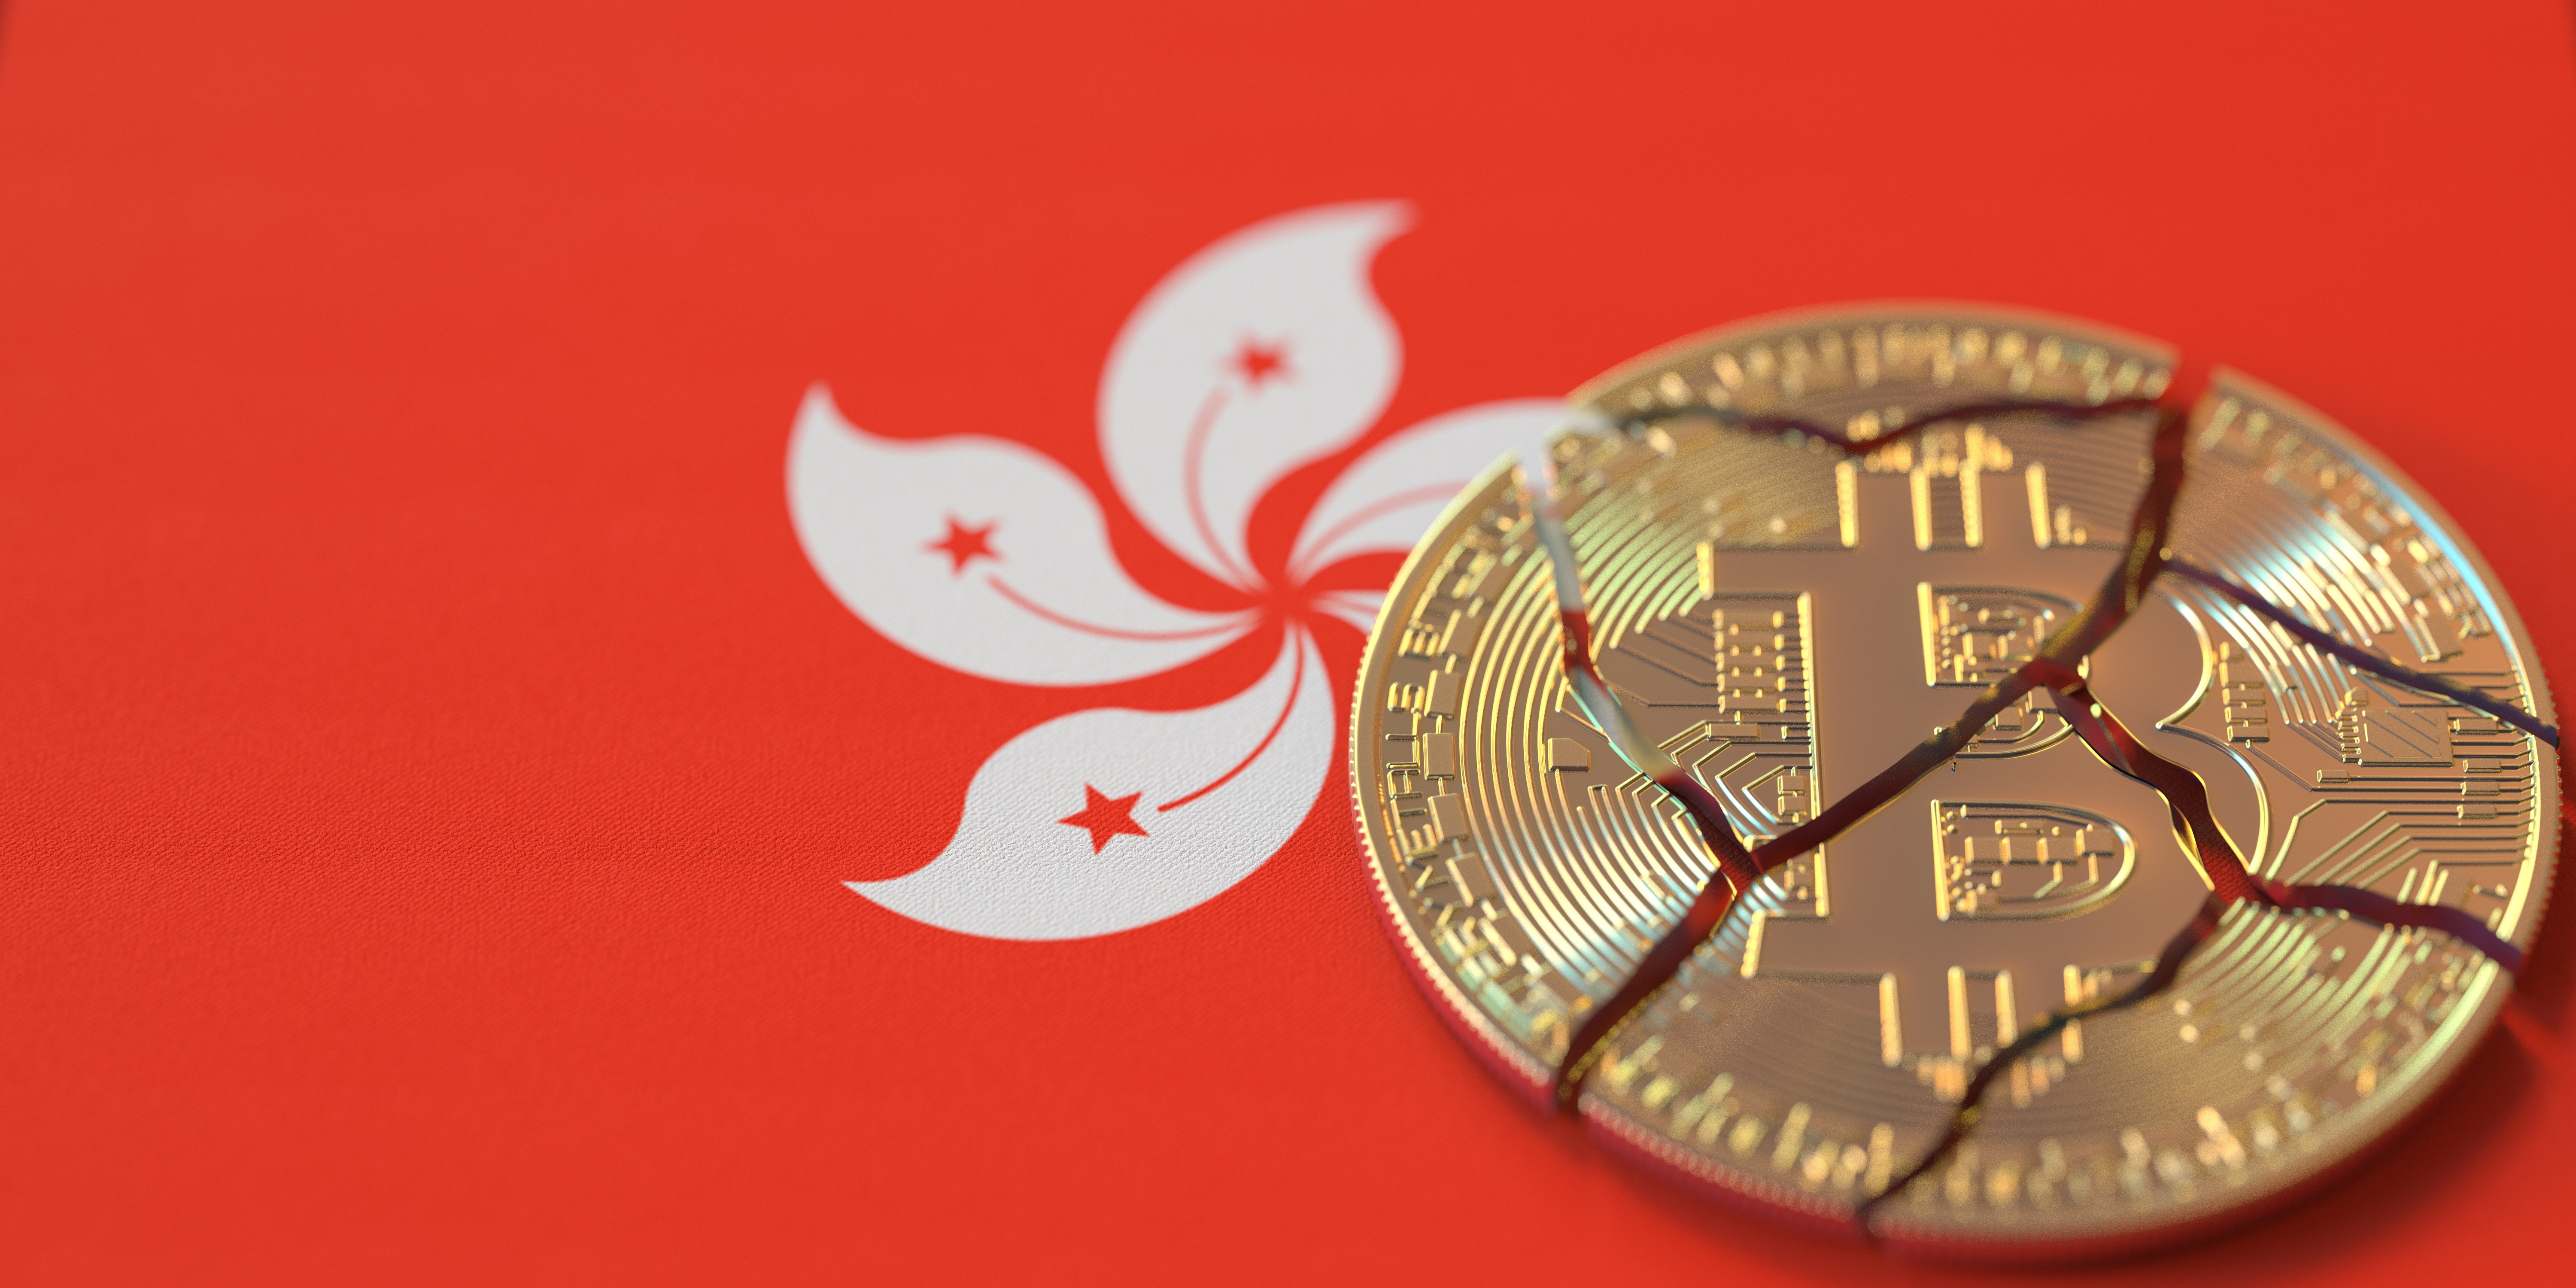 Image of a cracked Bitcoin, and Hong Kong flag, symbolizing crypto crackdown after JPEX scandal